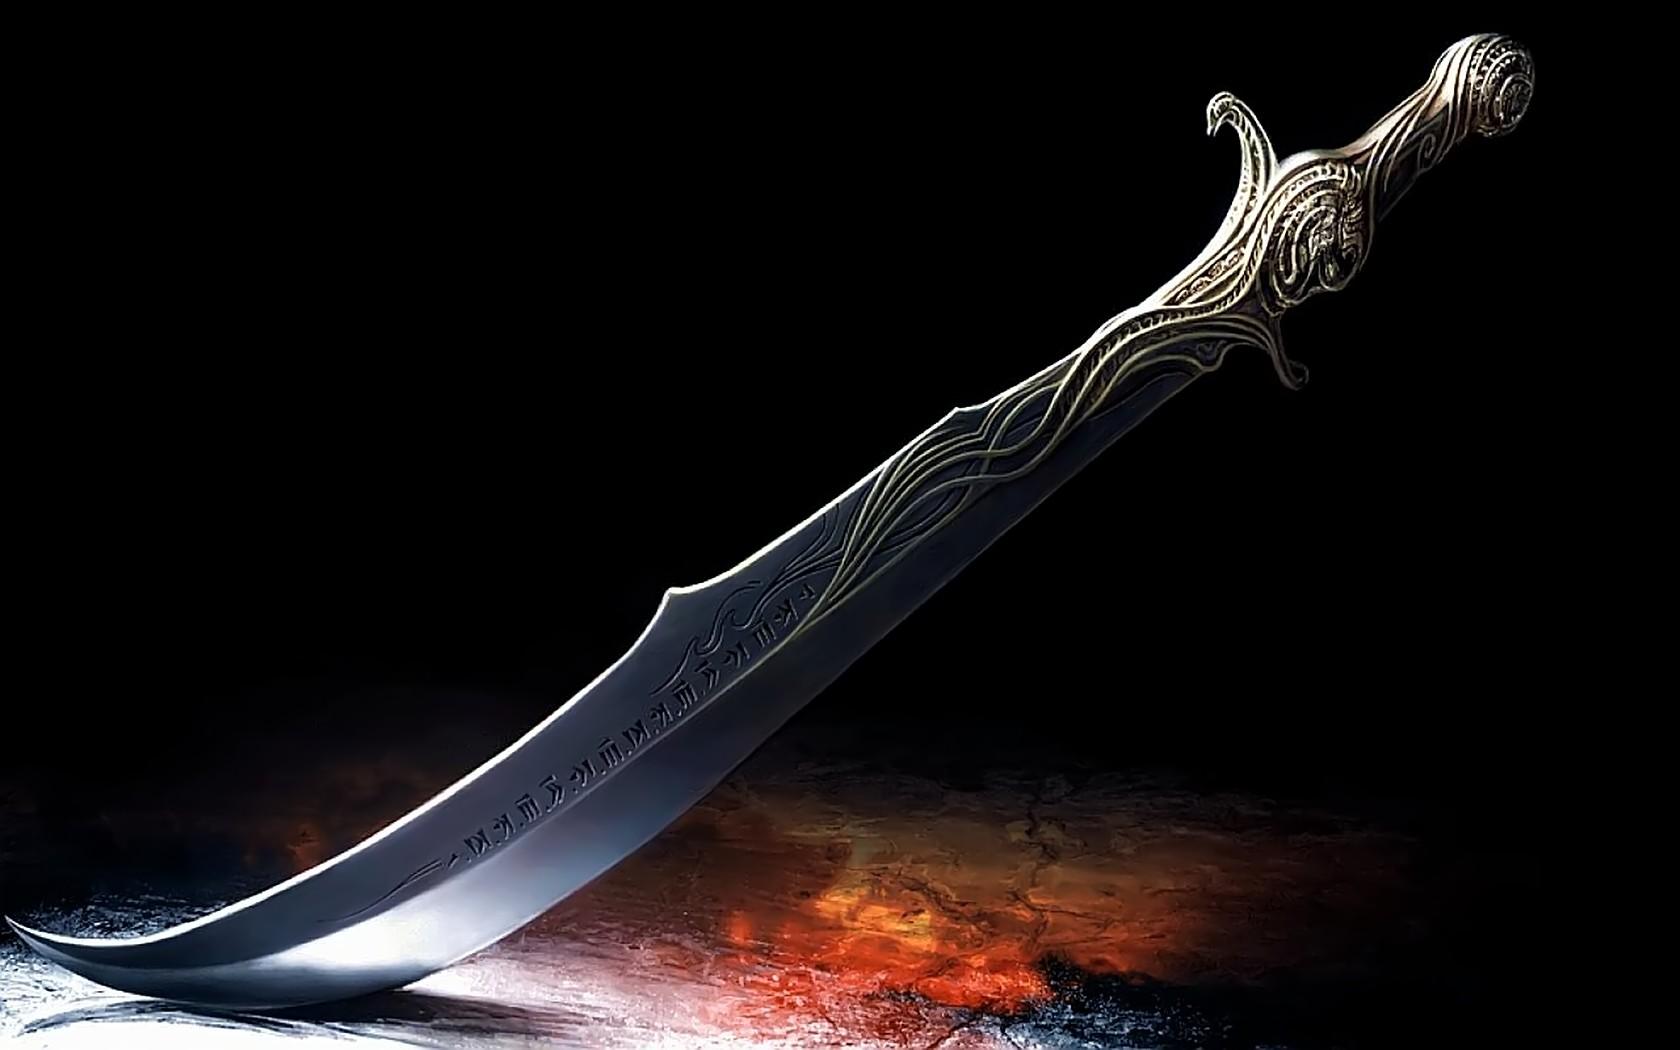 prince of persia, sword, fantasy, weapon, blade phone background